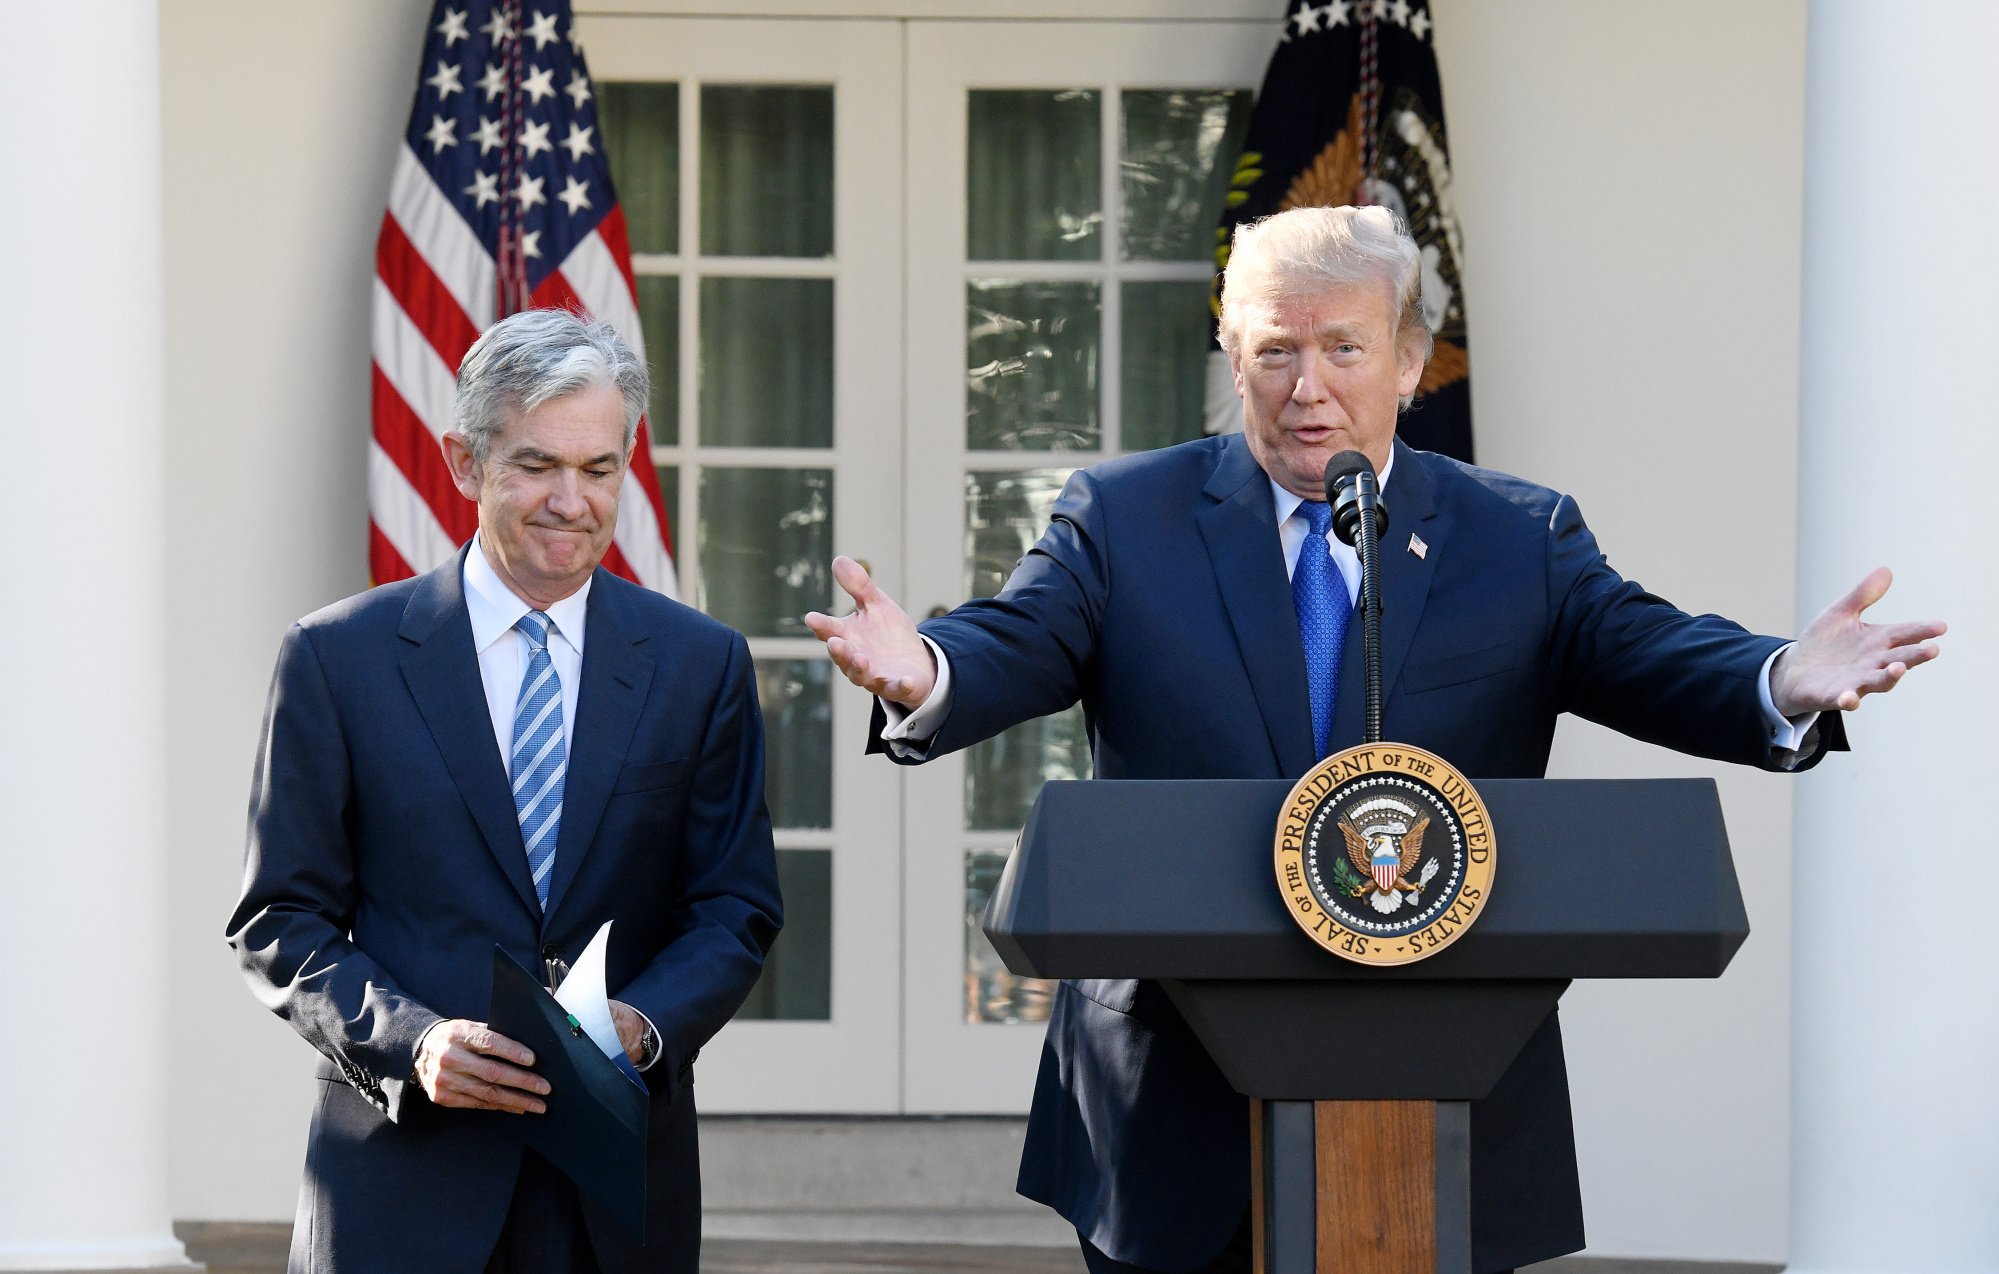 Fed Chair Jerome Powell and President Donald Trump at the White House.